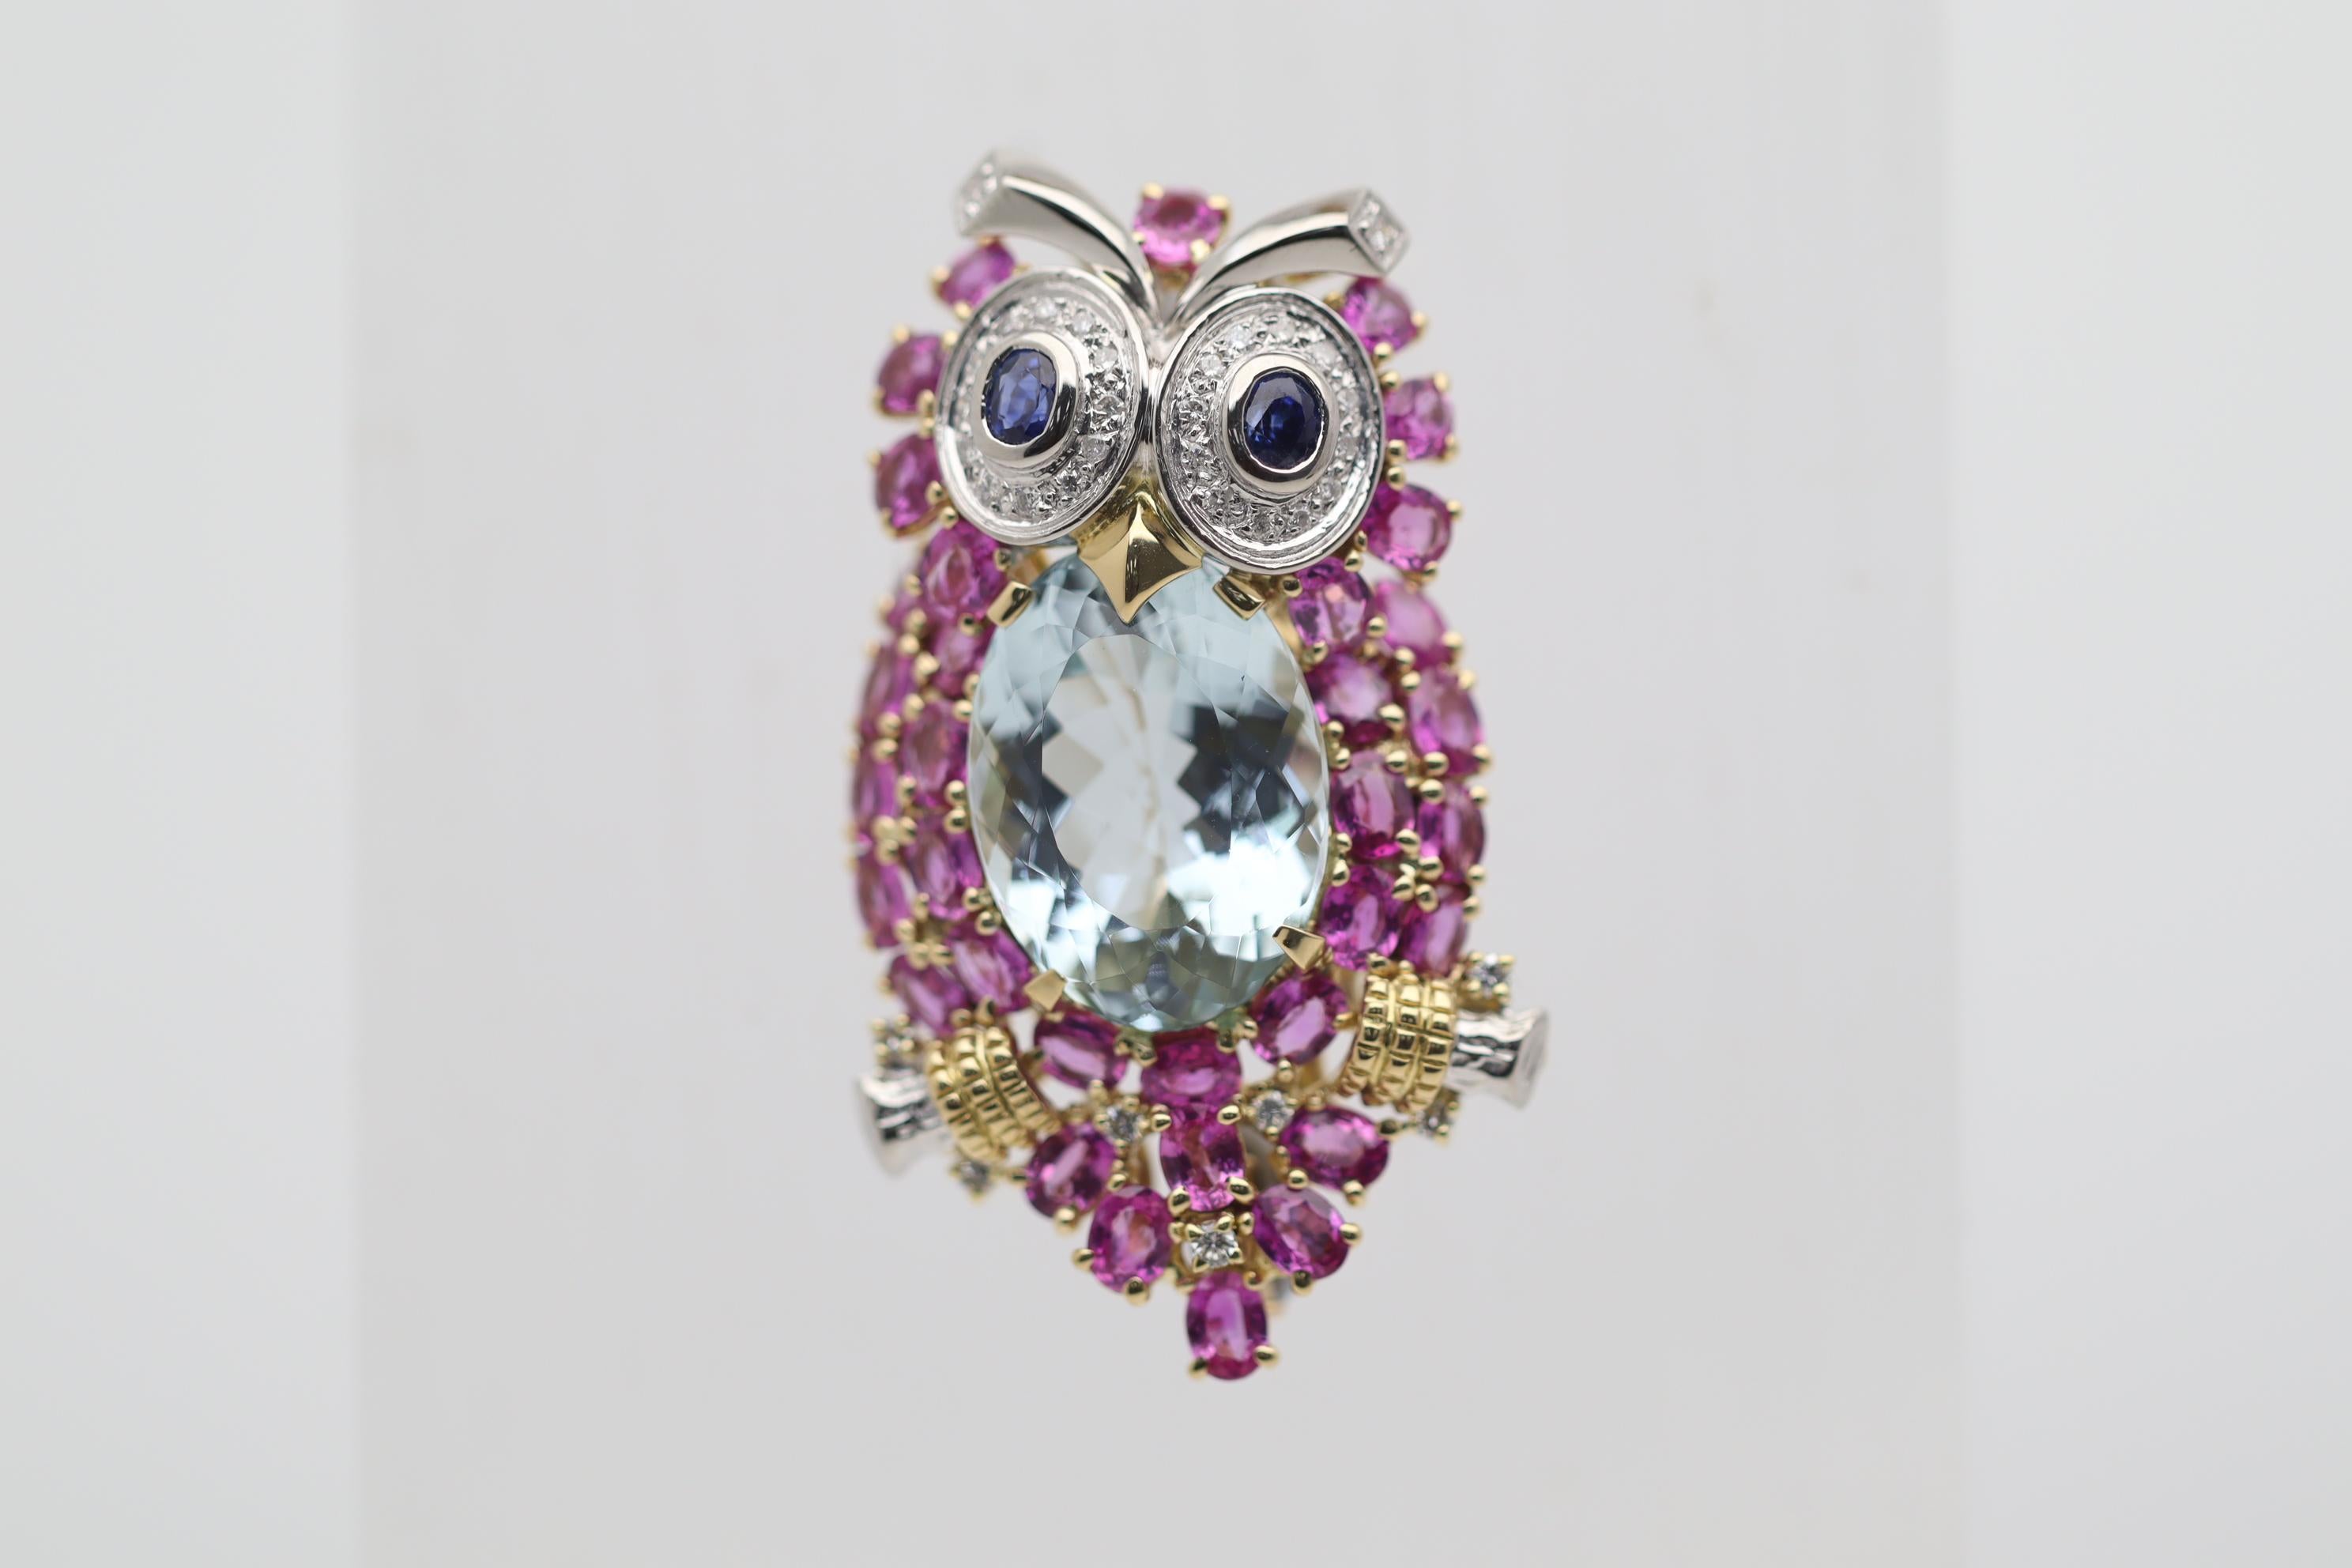 A stunningly adorable piece of fine jewelry! This friendly owl features a 12.64 carat aquamarine with a clean sea-blue color. Contrasting with the blue aquamarine are 6.23 carats of vivid pink sapphires set around the body as the owl’s feathers. Two